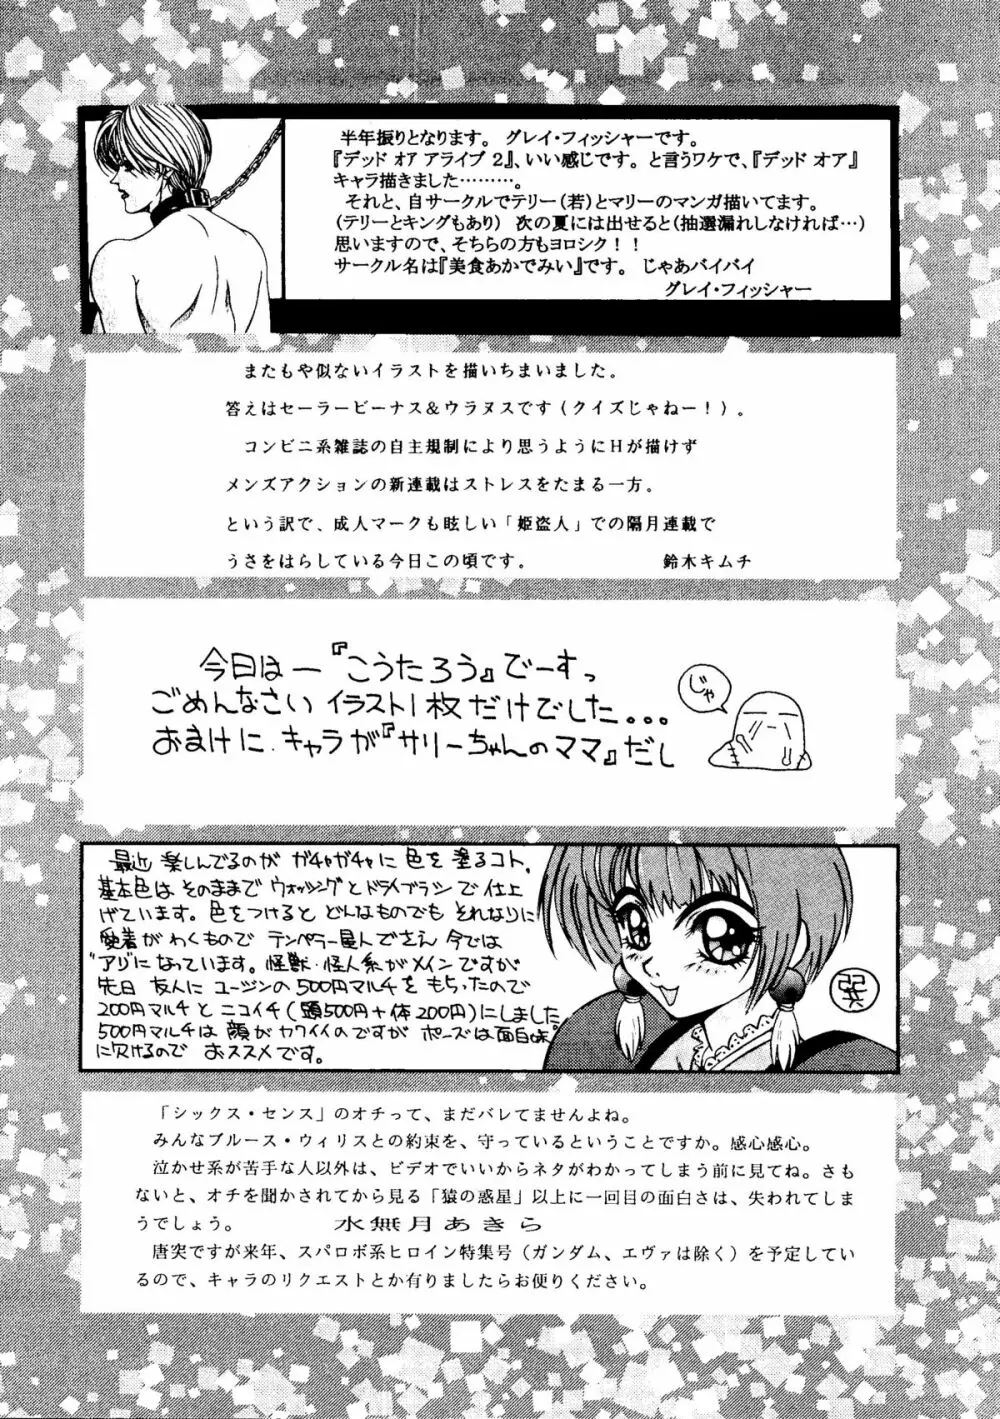 BUY or DIE おかちめんたいこ Page.97